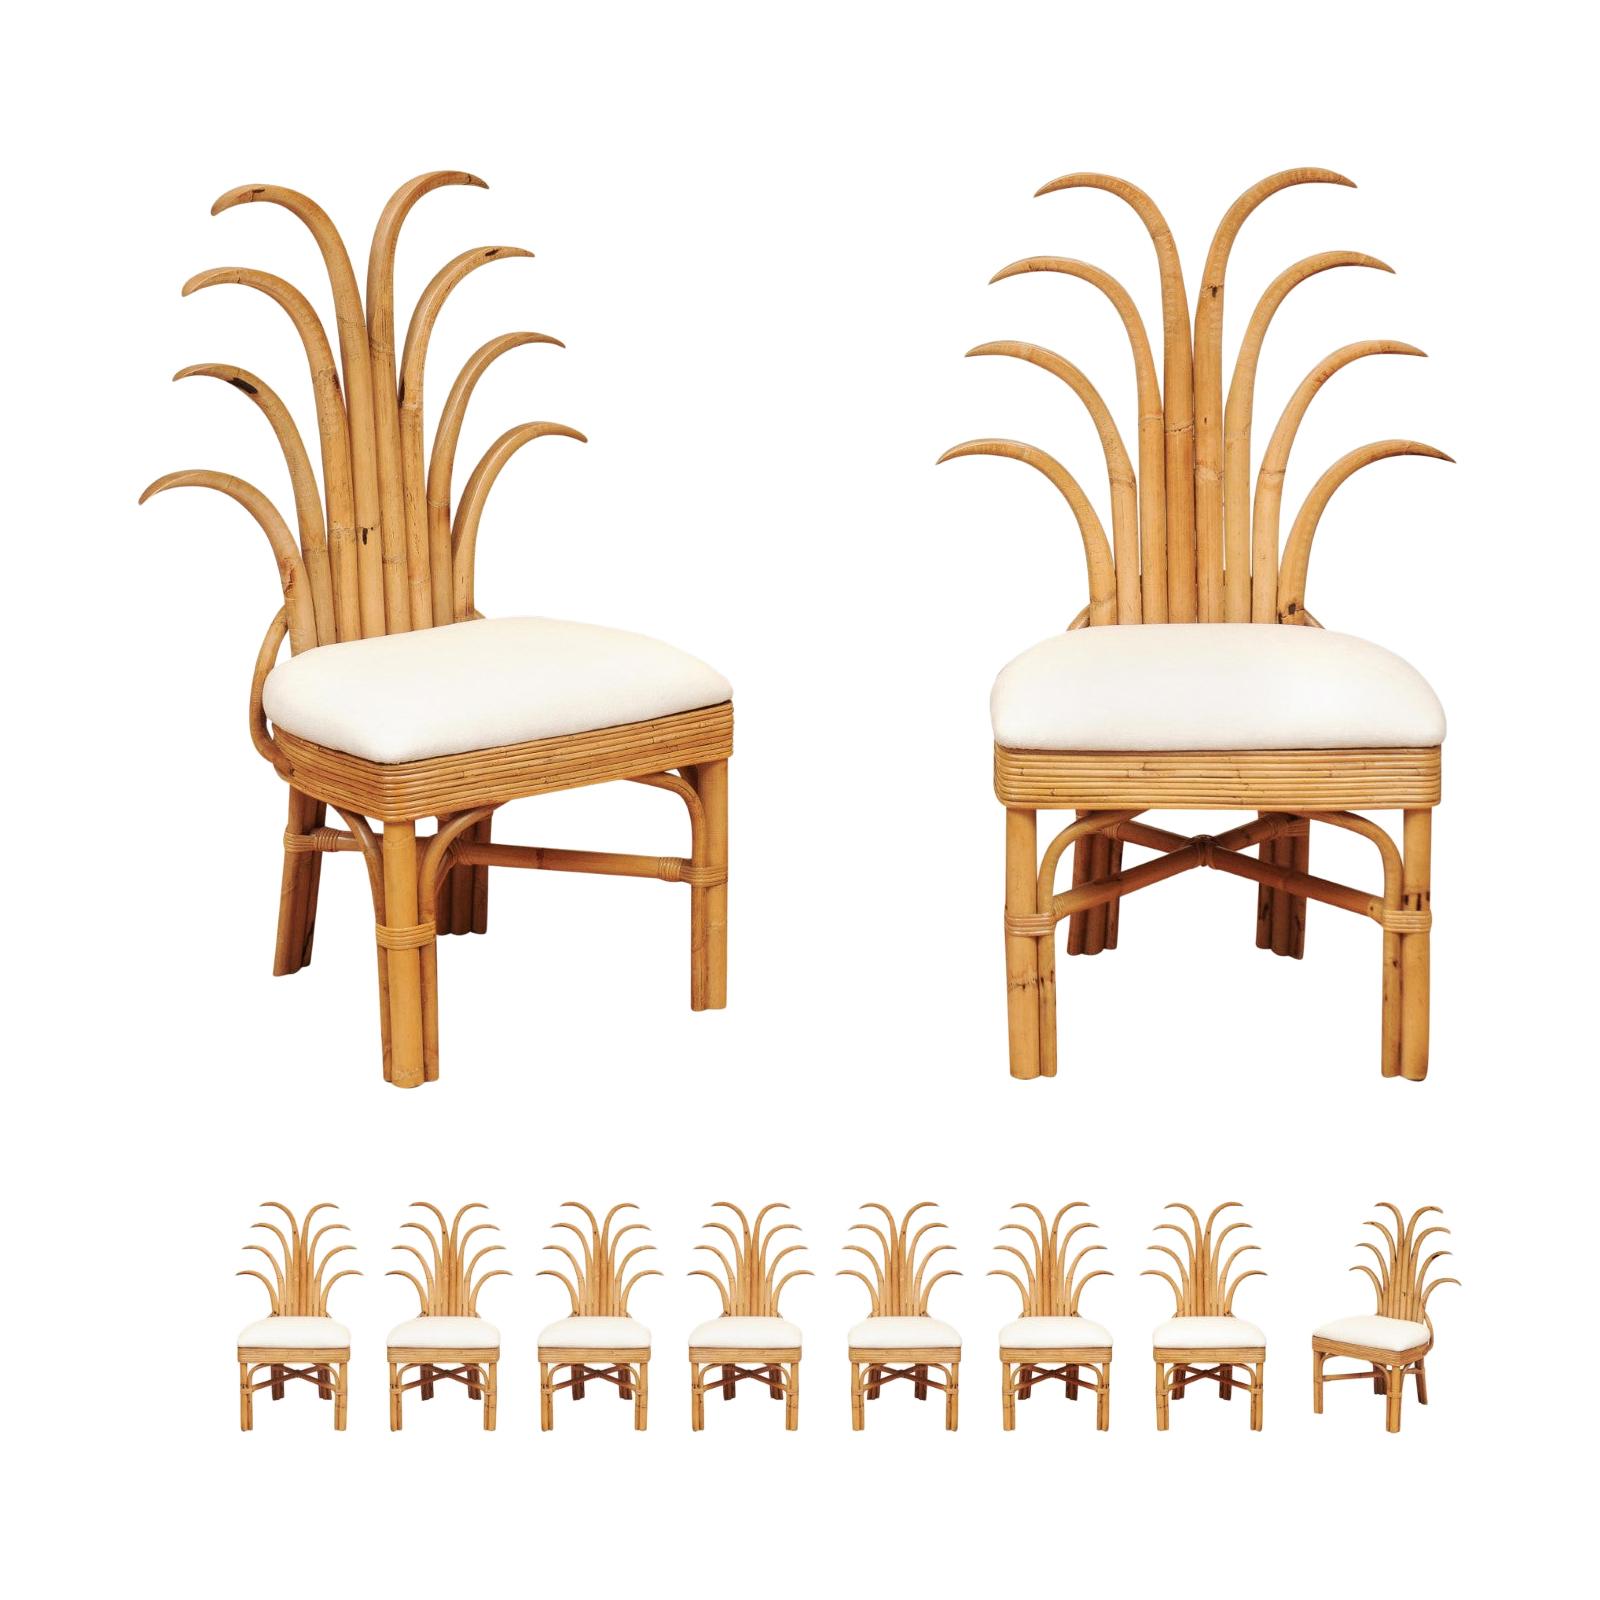 Jaw-Dropping Set of 10 Custom Made Palm Frond Dining Chairs, circa 1950